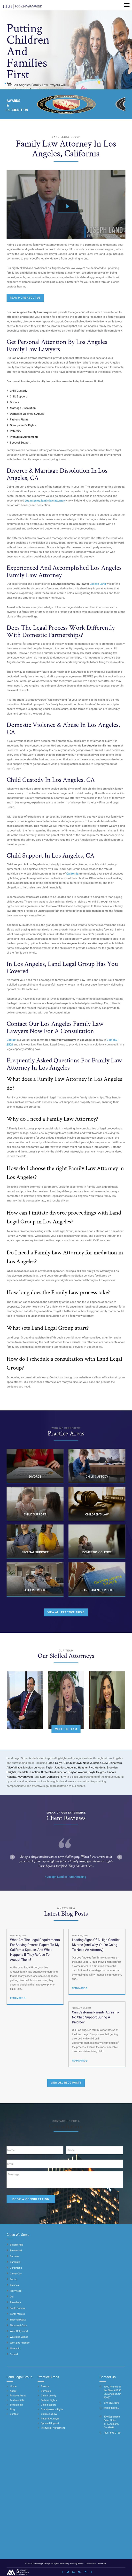 Land Legal Group - Los Angeles CA Lawyers